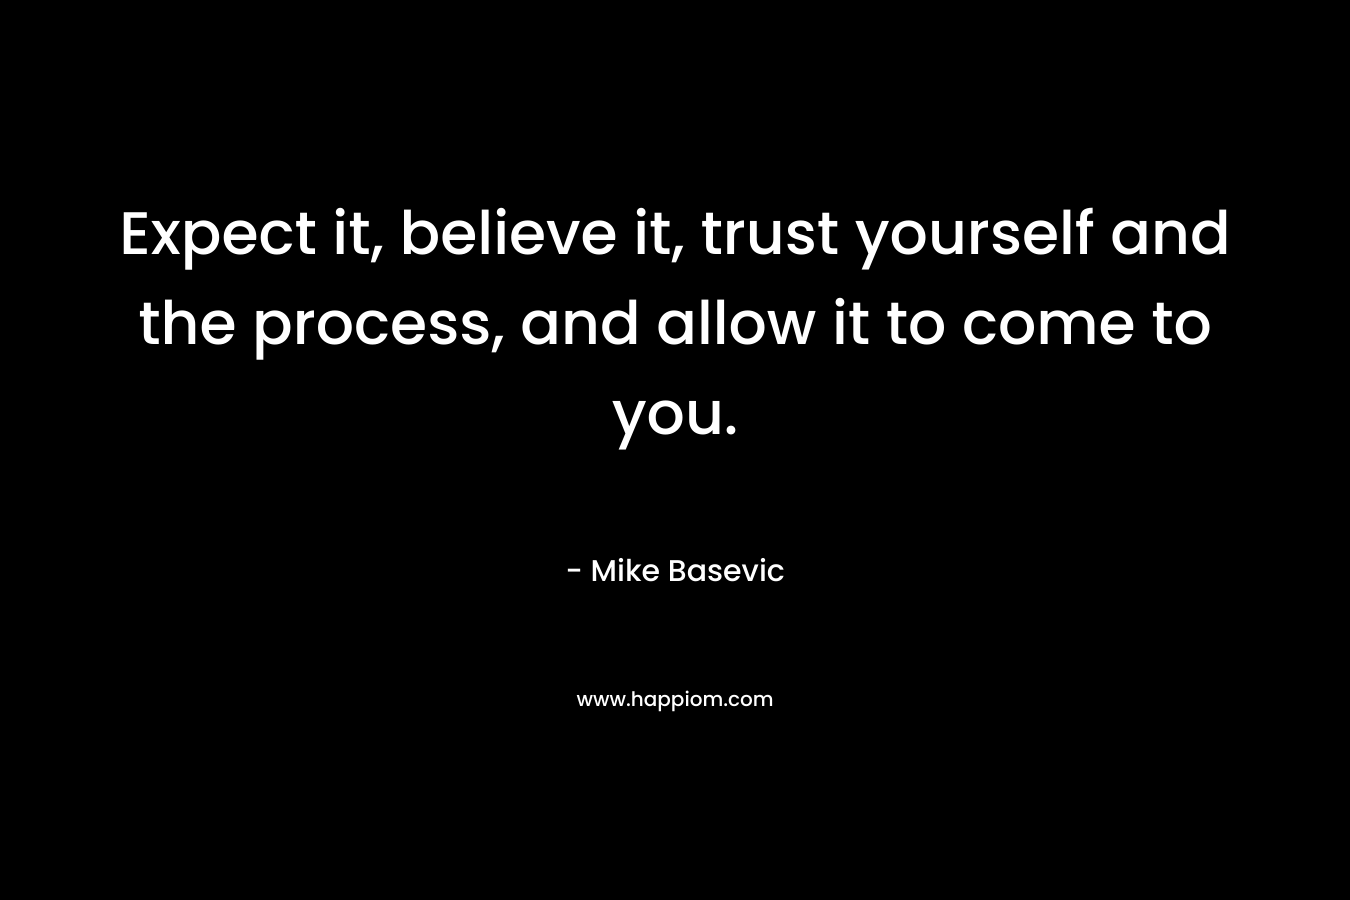 Expect it, believe it, trust yourself and the process, and allow it to come to you.